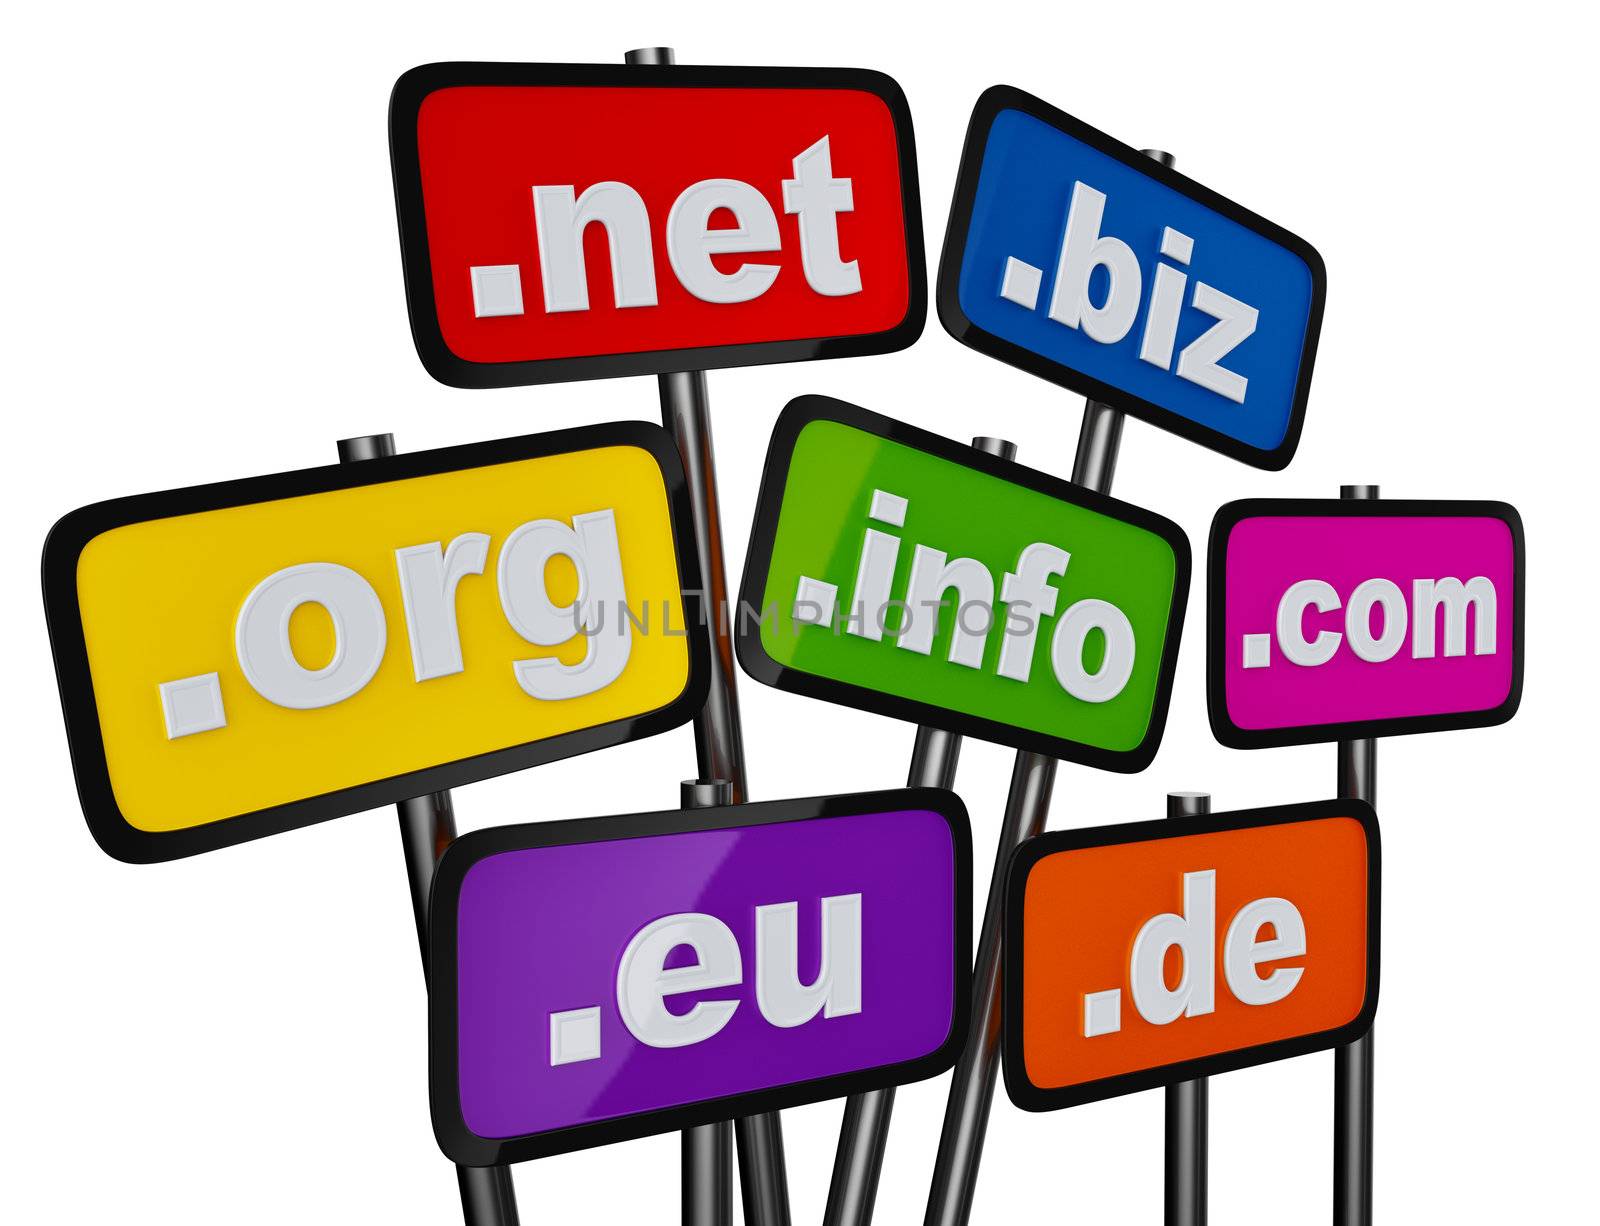 Set of signs with domains as buttons for searching in the Internet and social networks on a white background